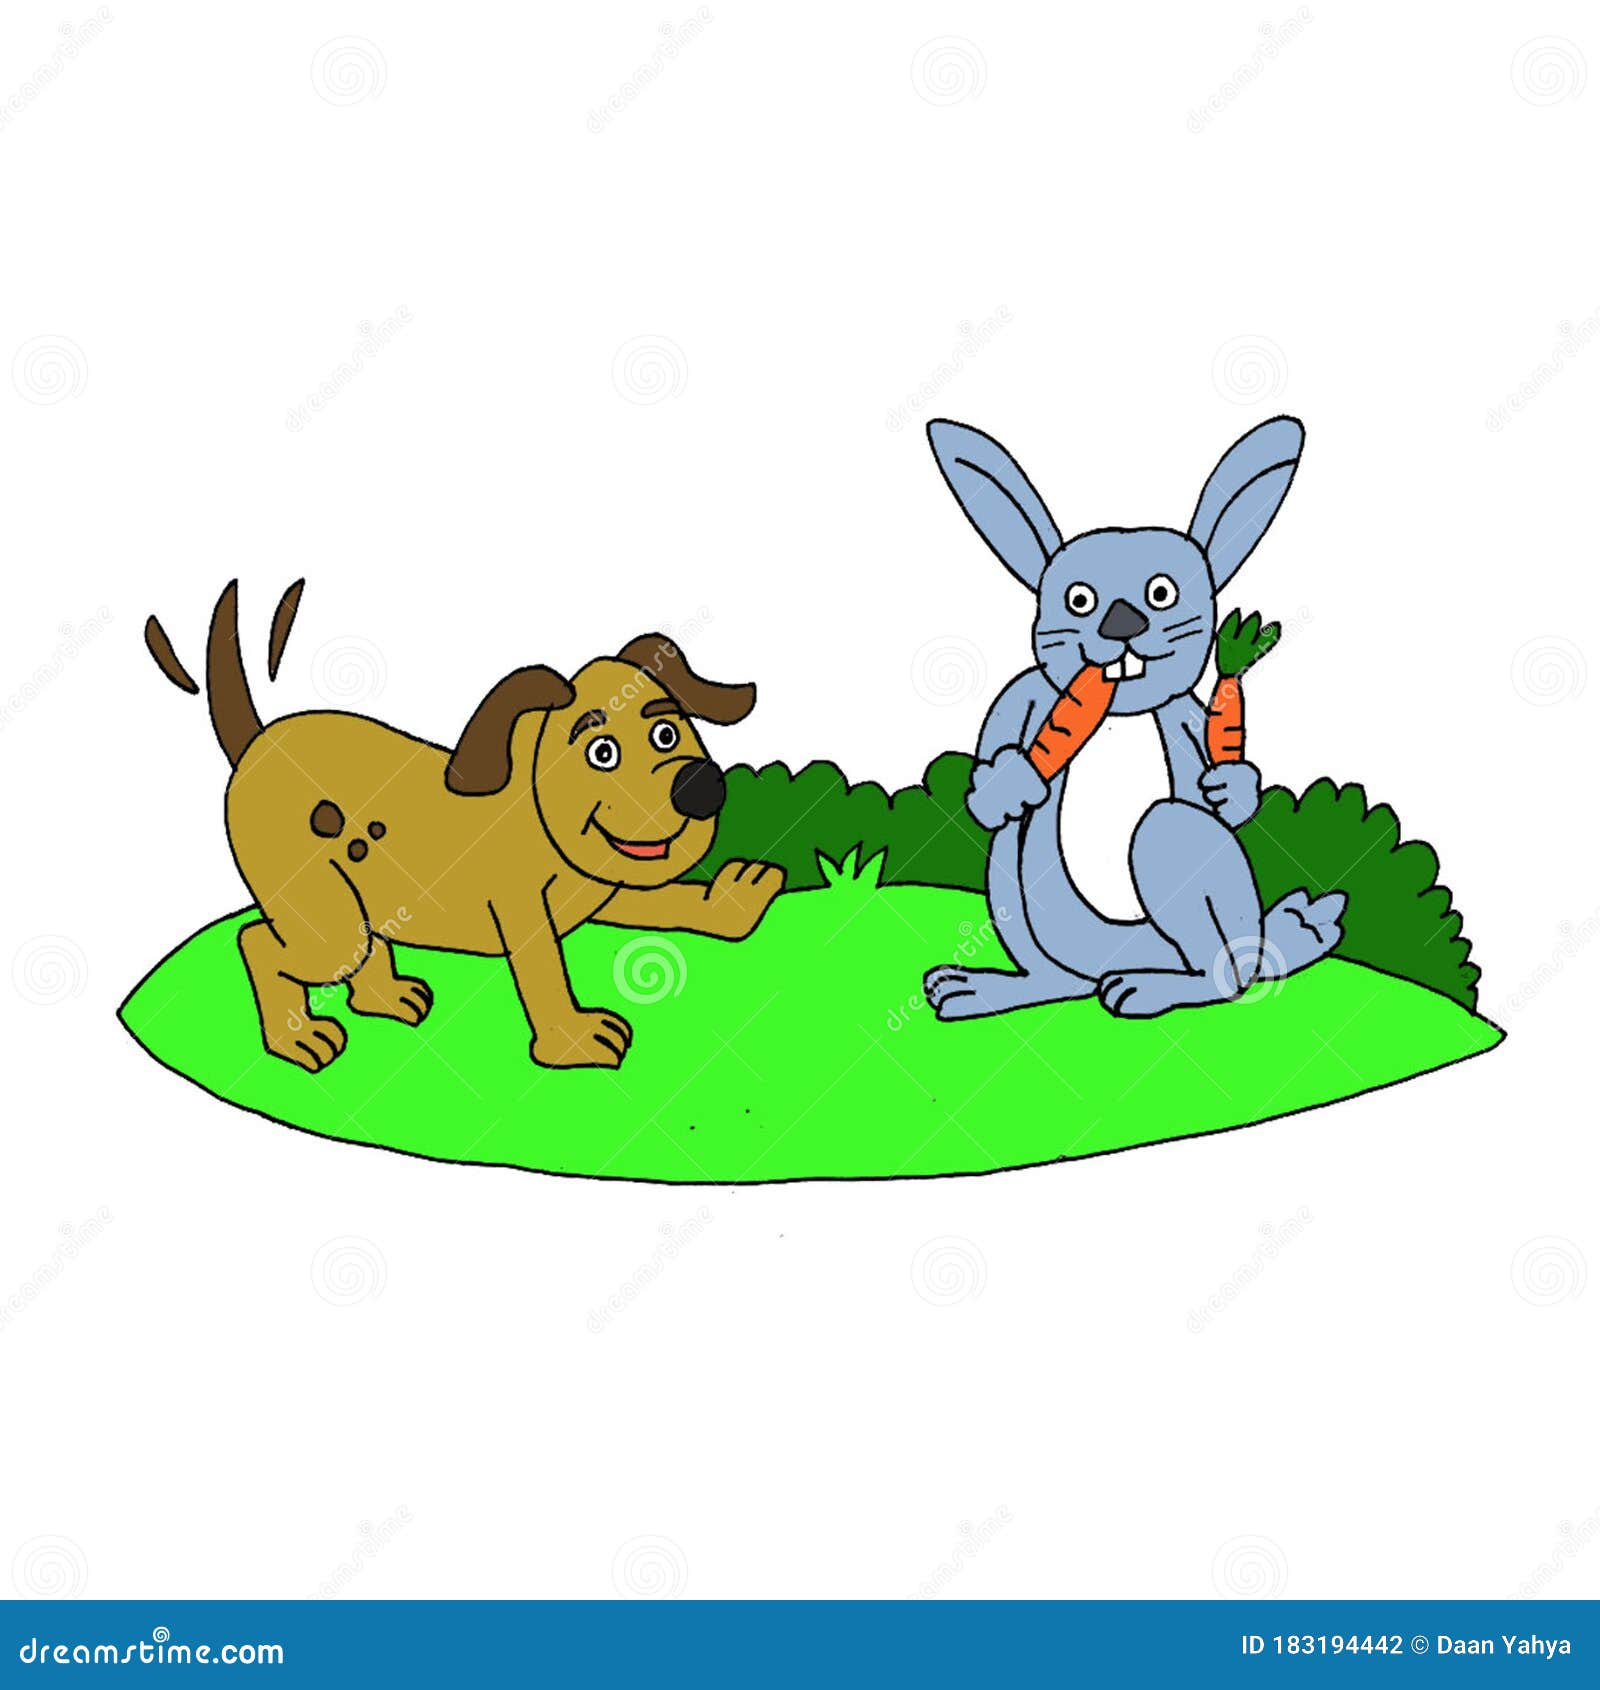 A Cute Dog is Greeting a Rabbit Who is Eating Carrots Cartoon Illustration  Stock Illustration - Illustration of bussinesman, drawing: 183194442